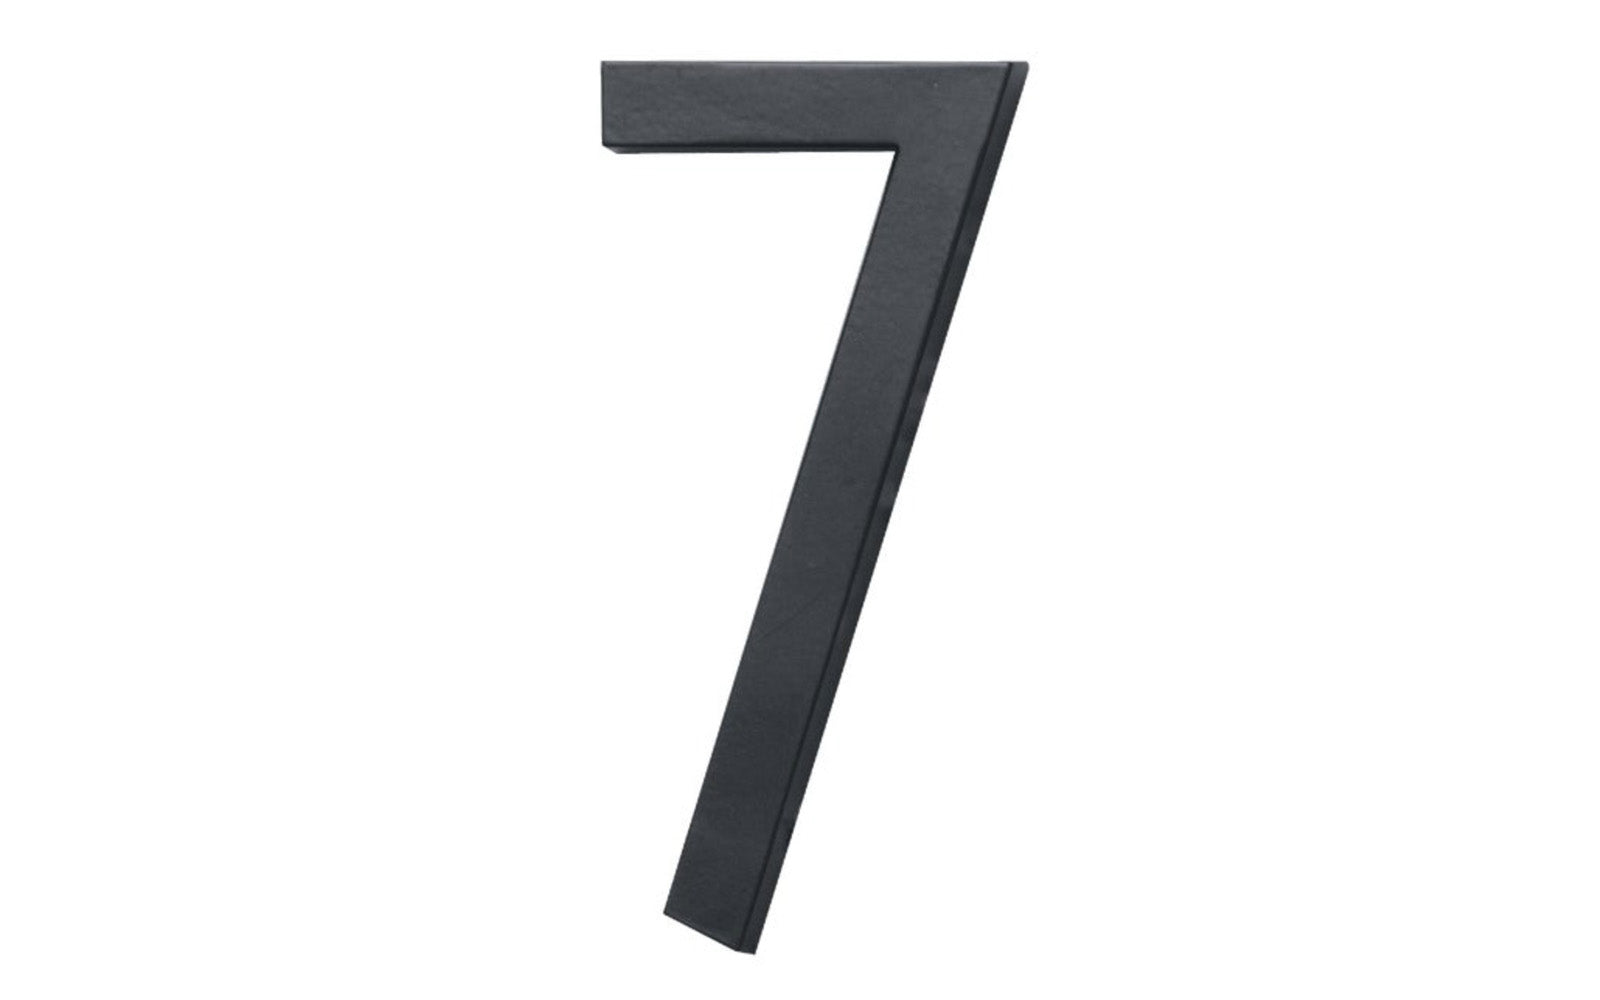 Number Seven House Number in a classy architectural style design. Satin black finish. 6" size house number with 1/2" material thickness. Can be installed flush mount or floating mount (elevated from wall for a shadow effect). #7 House Number. Hy-Ko Model No. FM-6/7. 029069310776